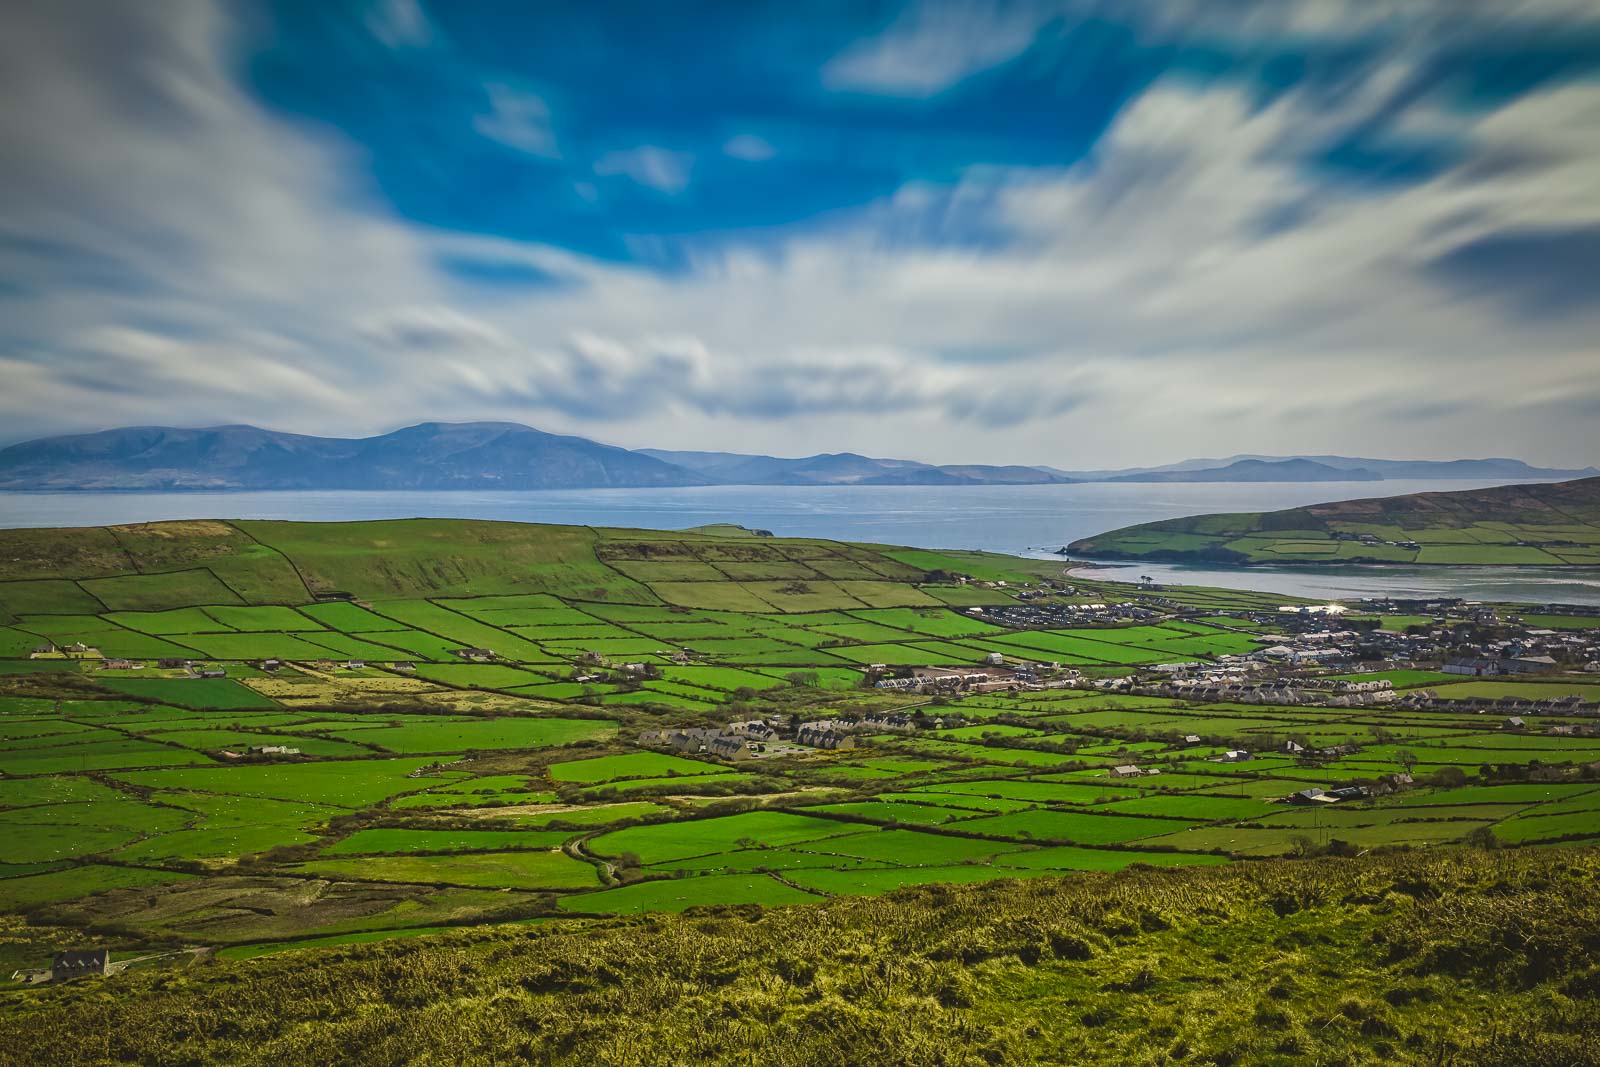 Ireland known as the Emerald Isle